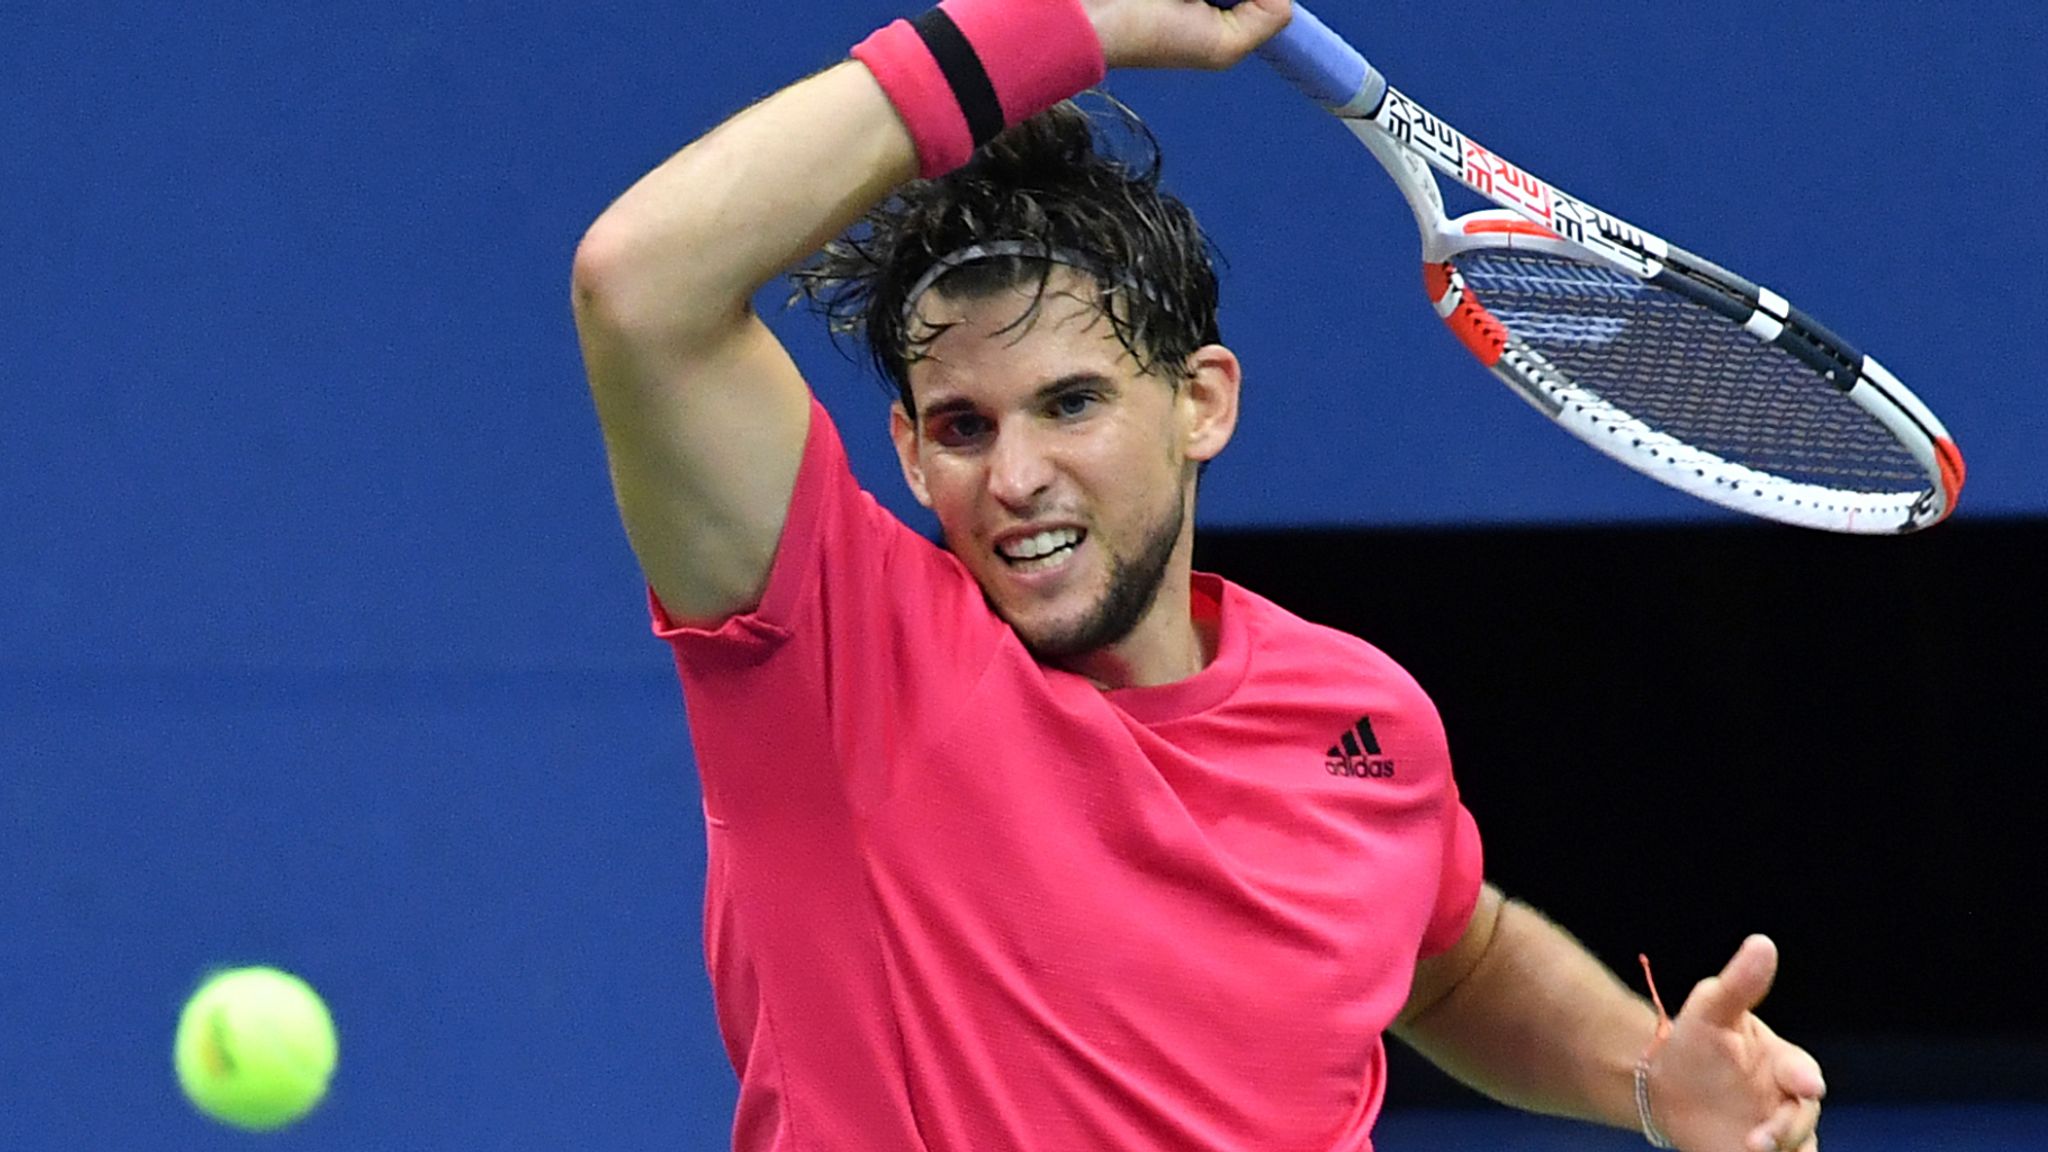 Dominic Thiem says he is not yet fully fit and is skipping this month's  Monte Carlo Masters | Tennis News | Sky Sports